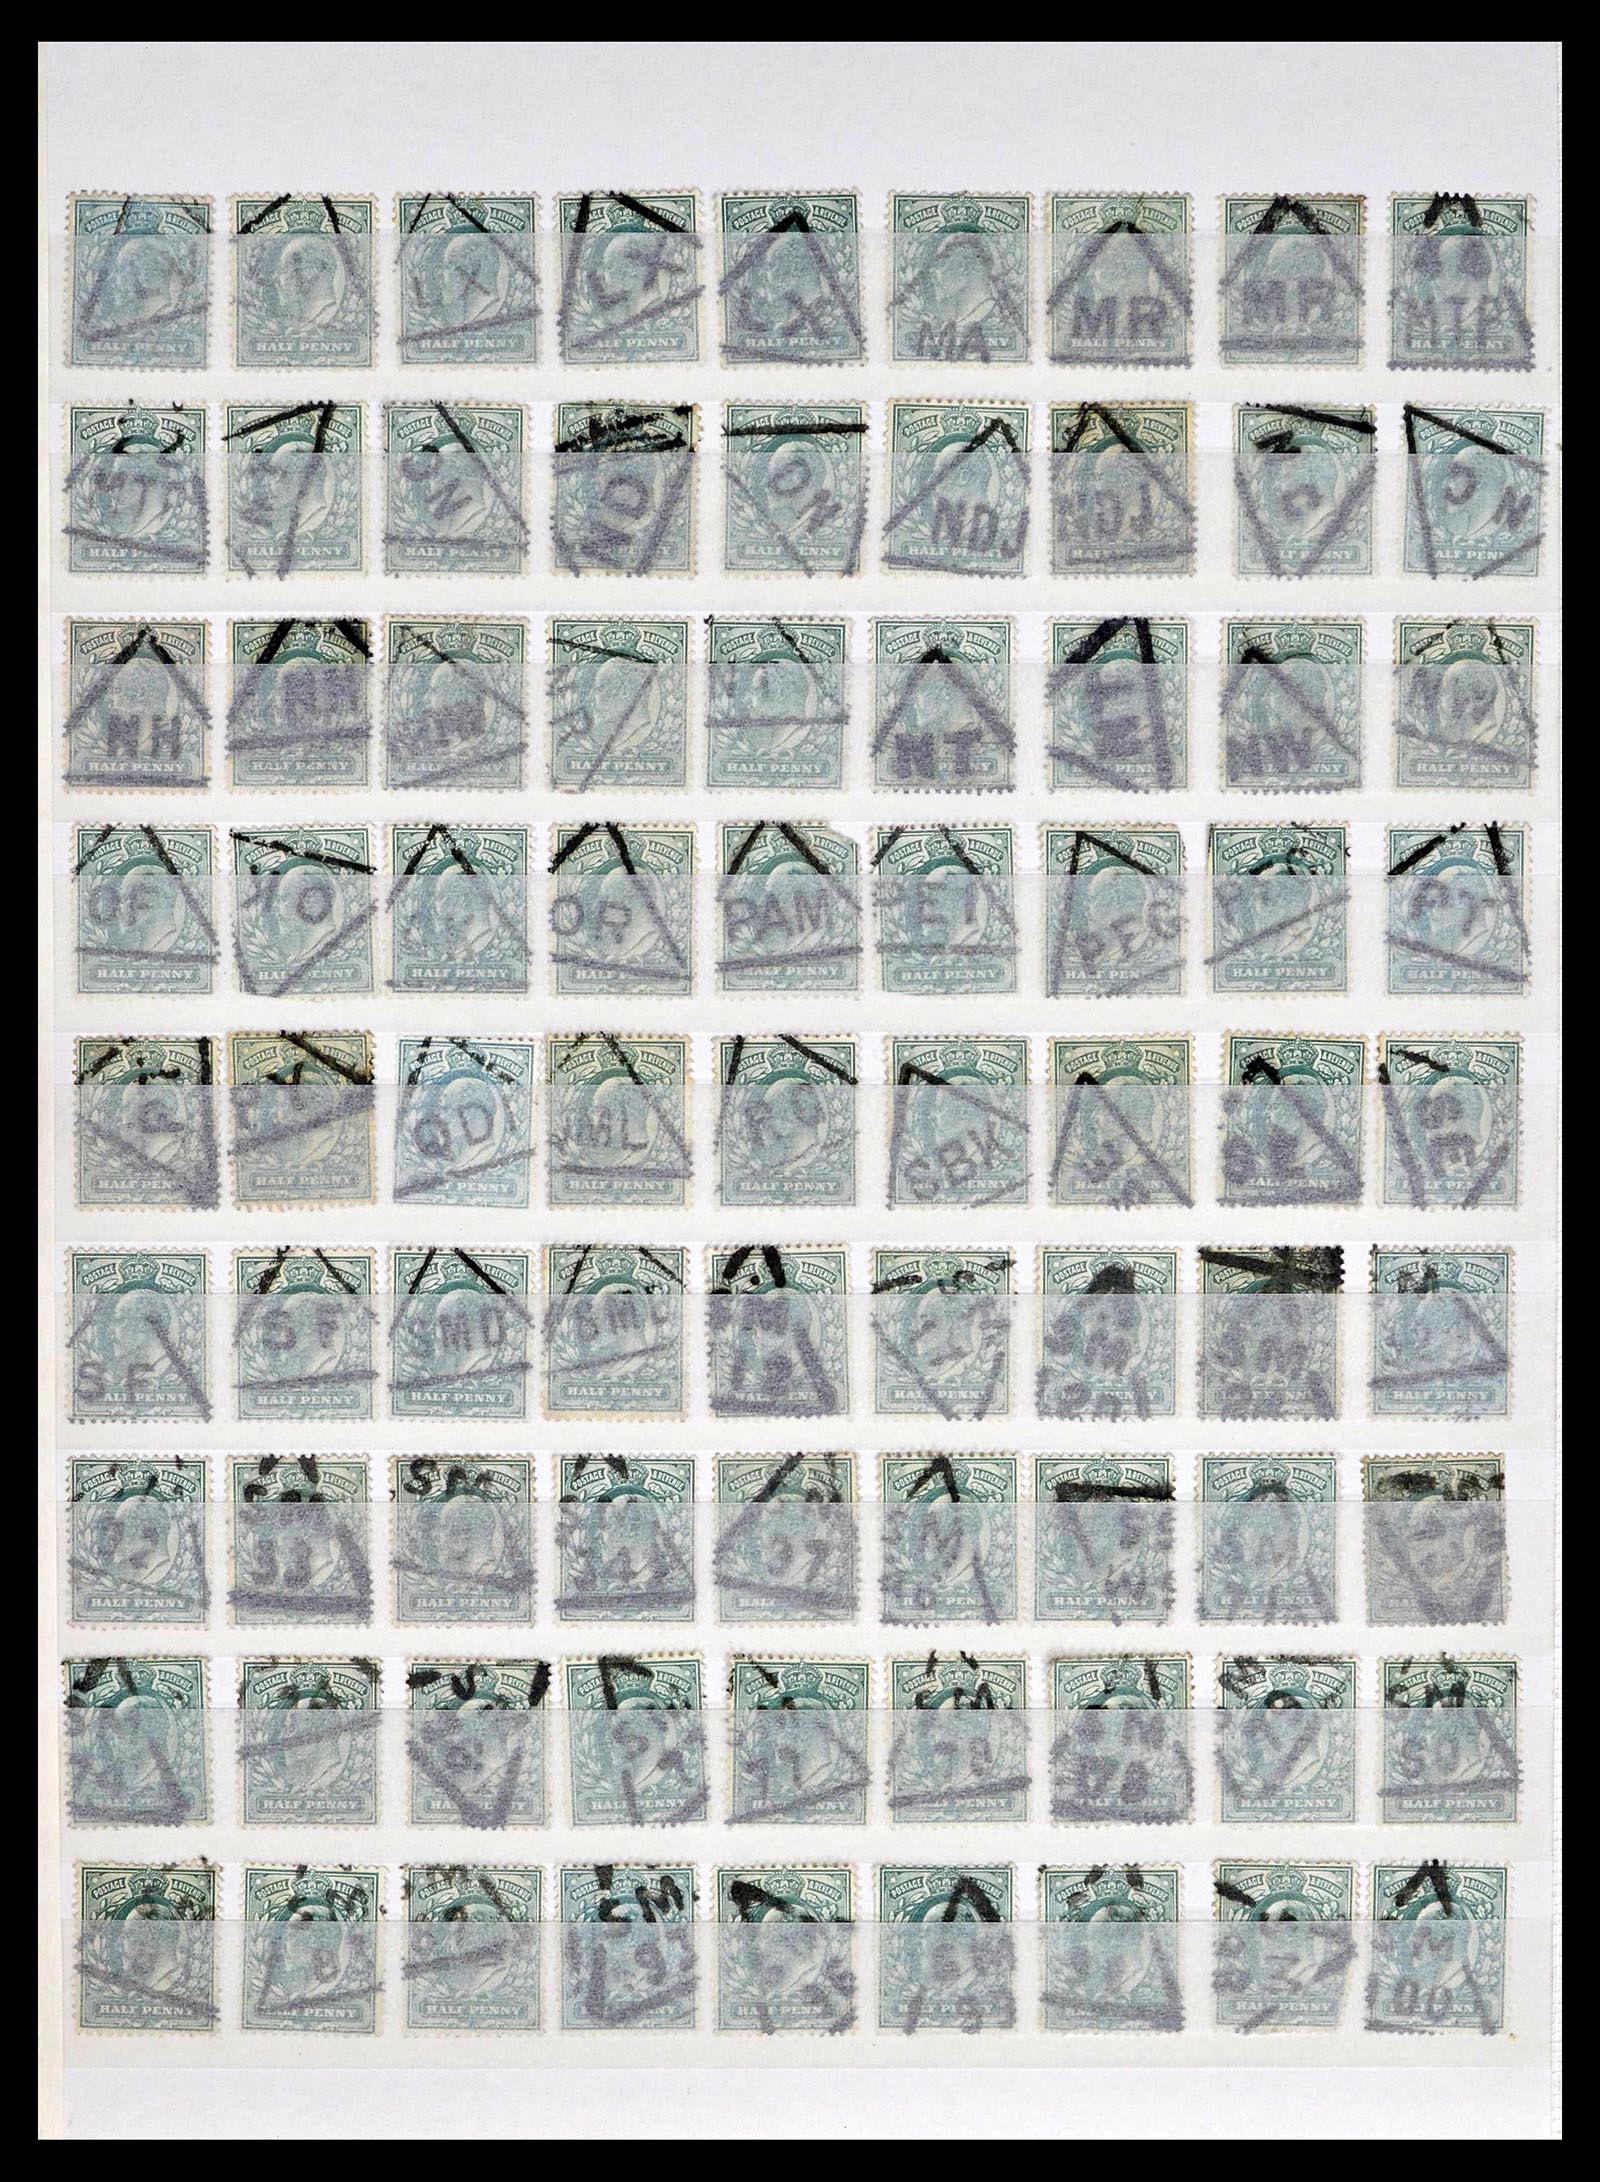 39196 0098 - Stamp collection 39196 Great Britain 1844-1955.